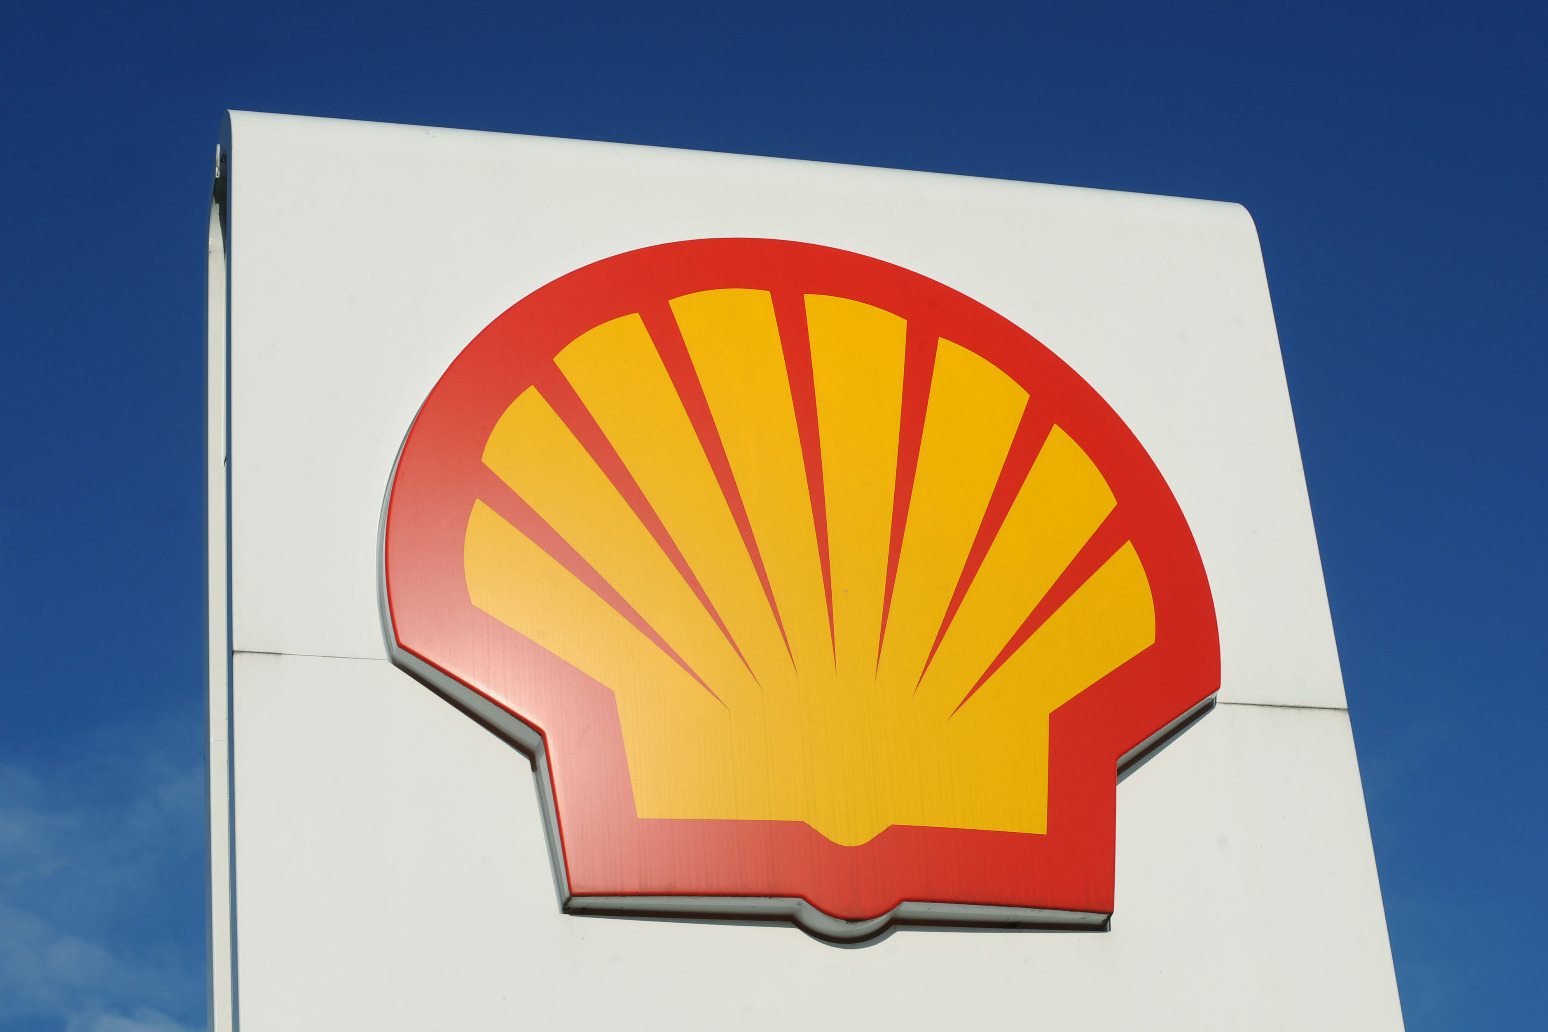 Shell waters down part of its 2030 carbon reduction pledge 